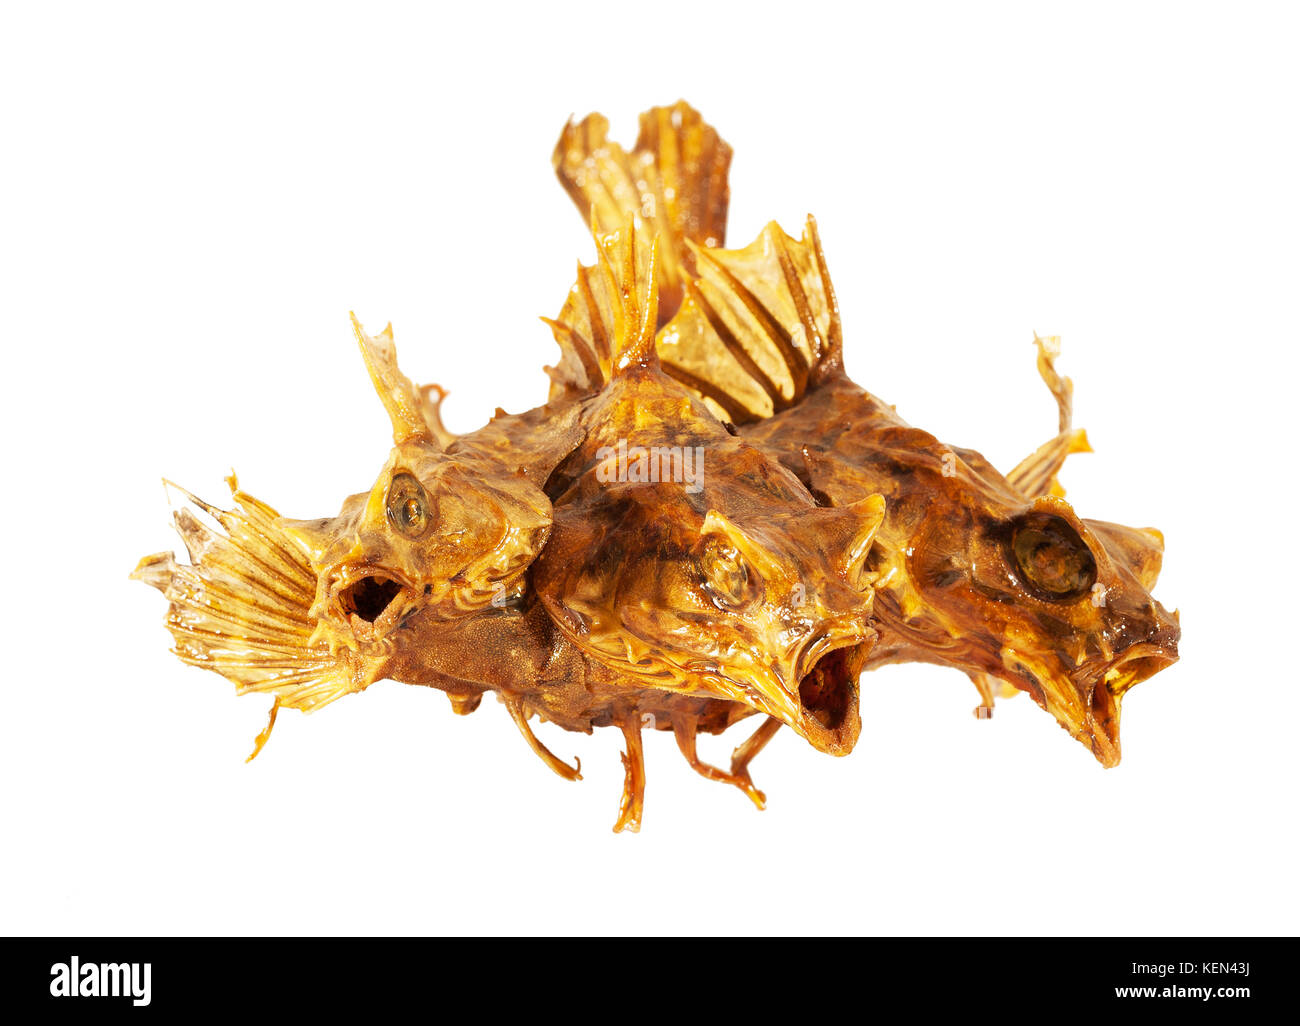 Handmade three head yellow monster figure with wings made of three dried fish isolated on the white background. Stock Photo